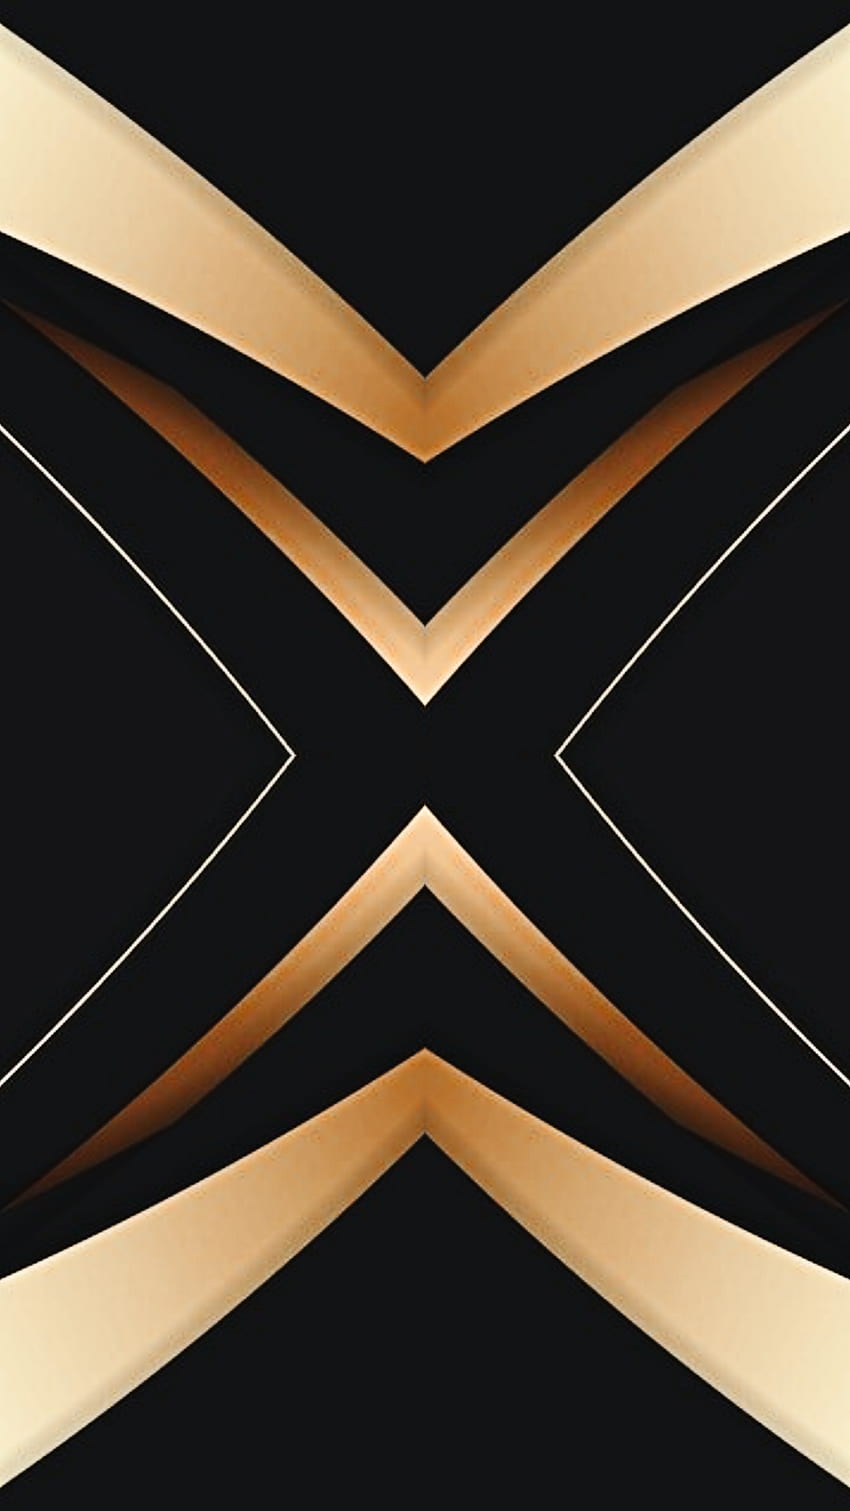 material design gold, tech, shapes, texture, black, geometric, pattern, gamer, abstract, iphone HD phone wallpaper